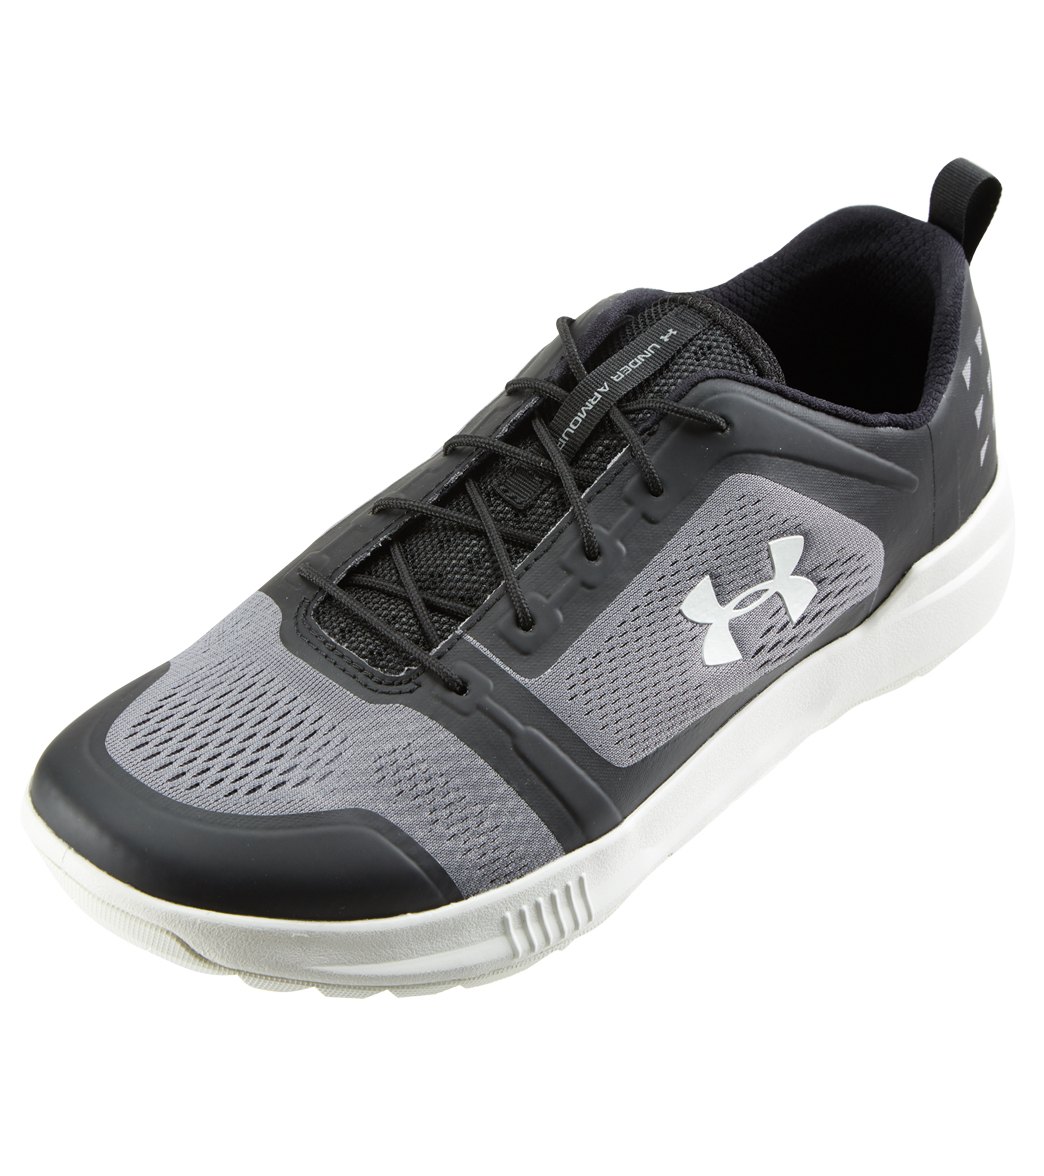 Under Armour Men's Scupper Water Shoes at